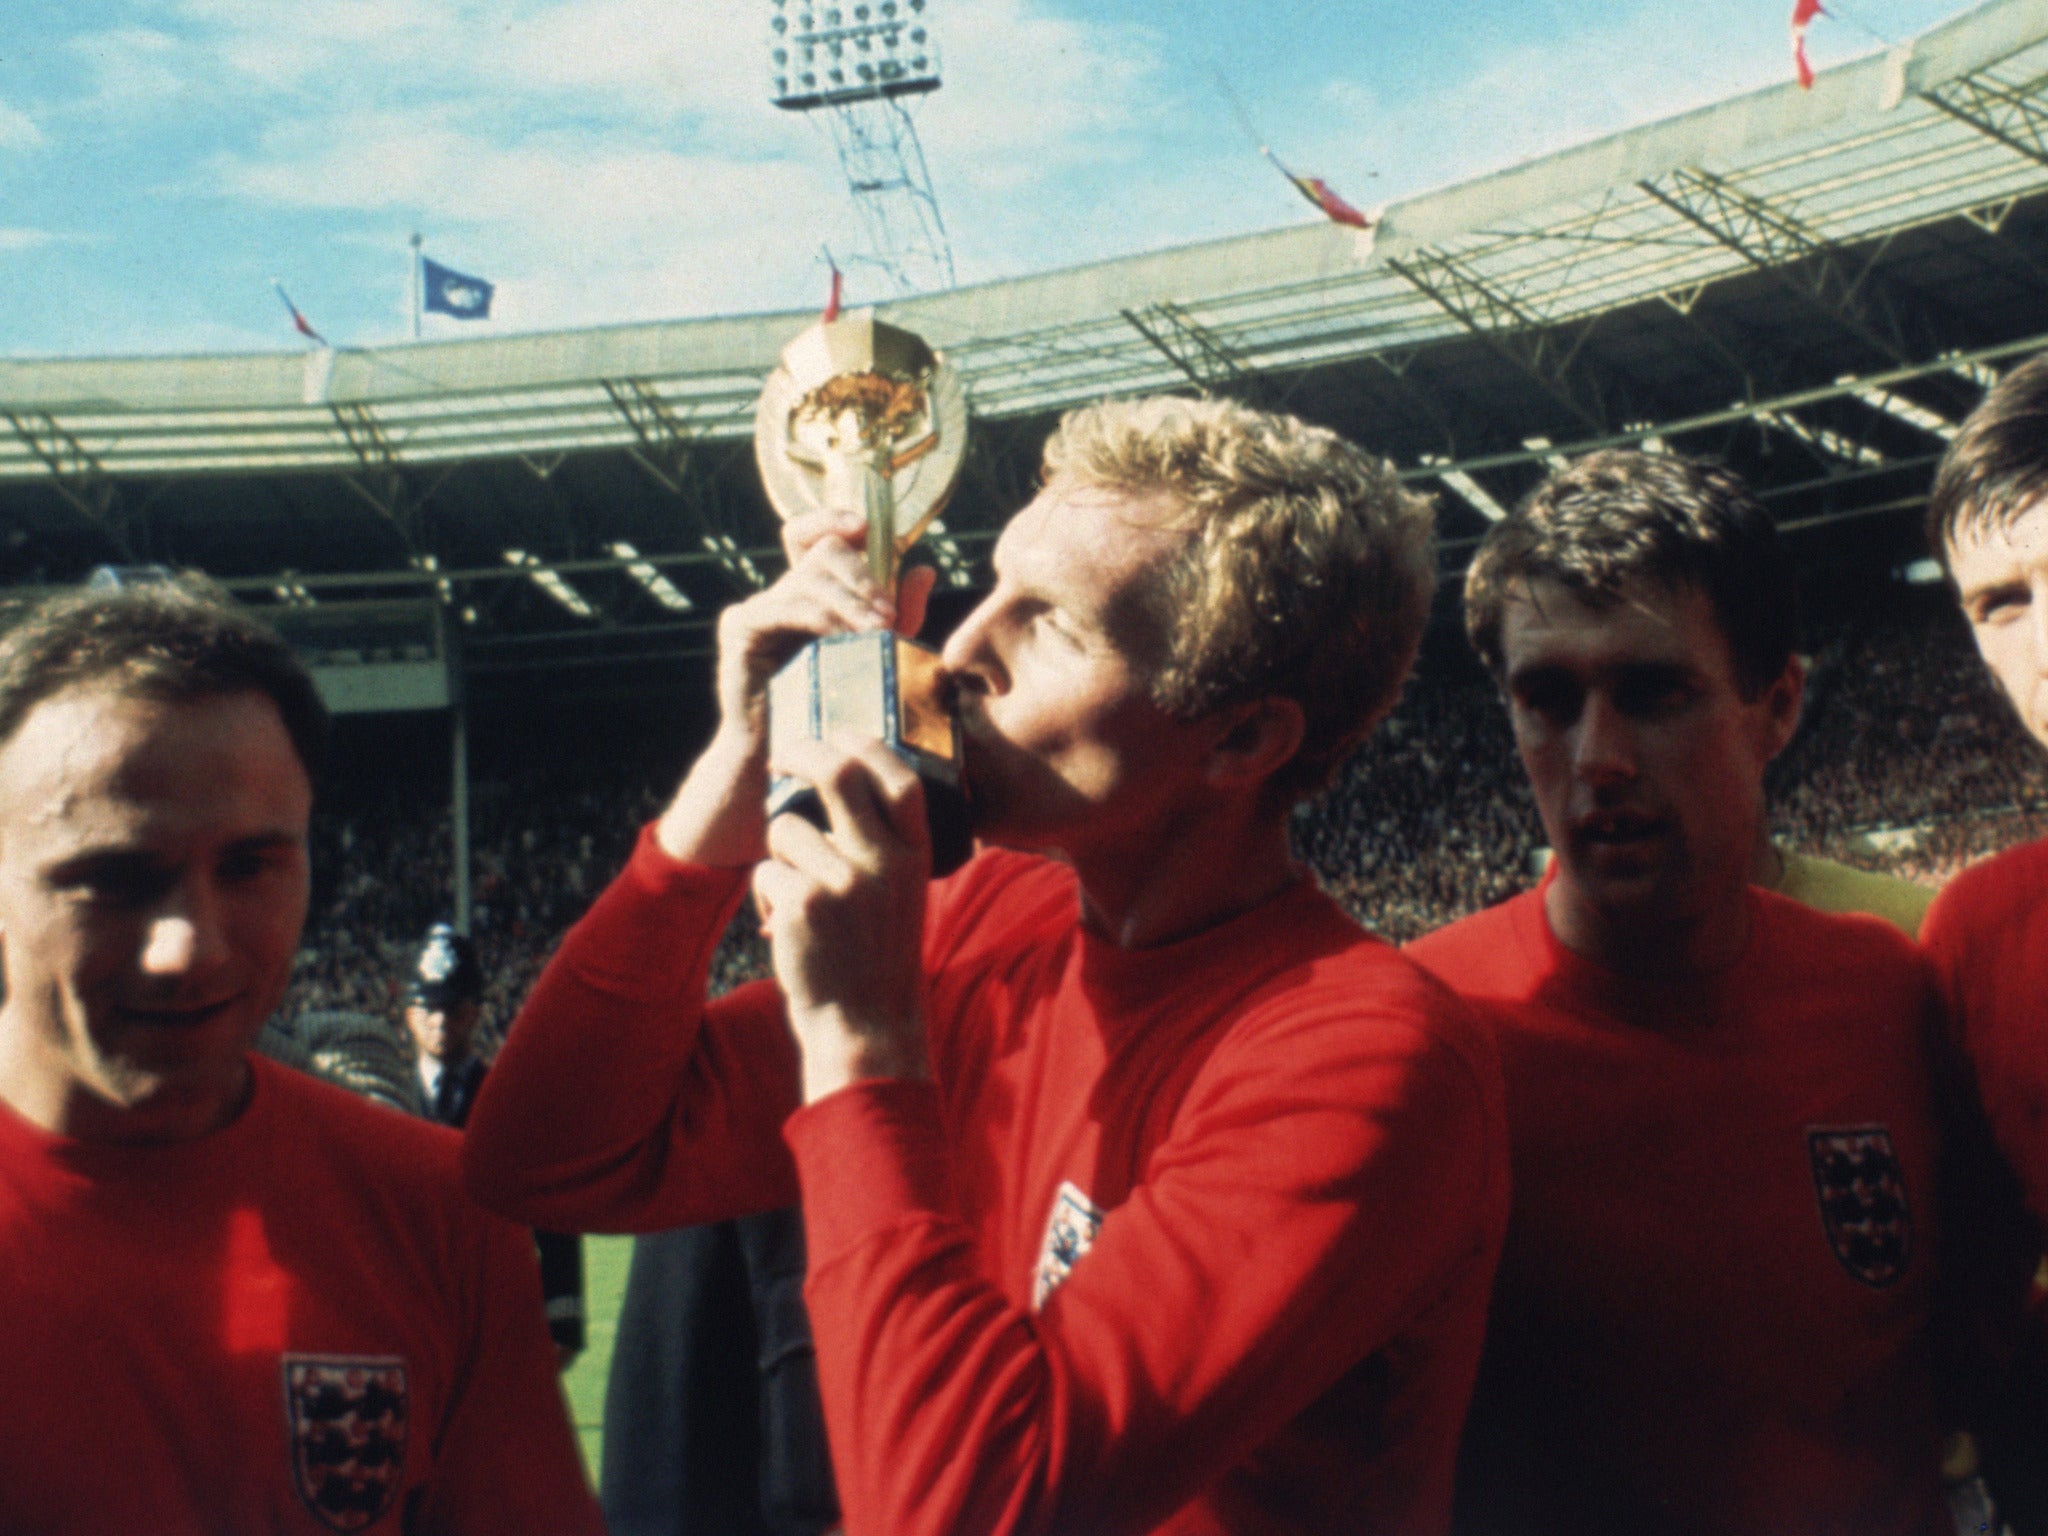 fans　World　Independent　Cup　The　of　1966　voted　England　greatest　all　kit　by　The　the　time　Independent